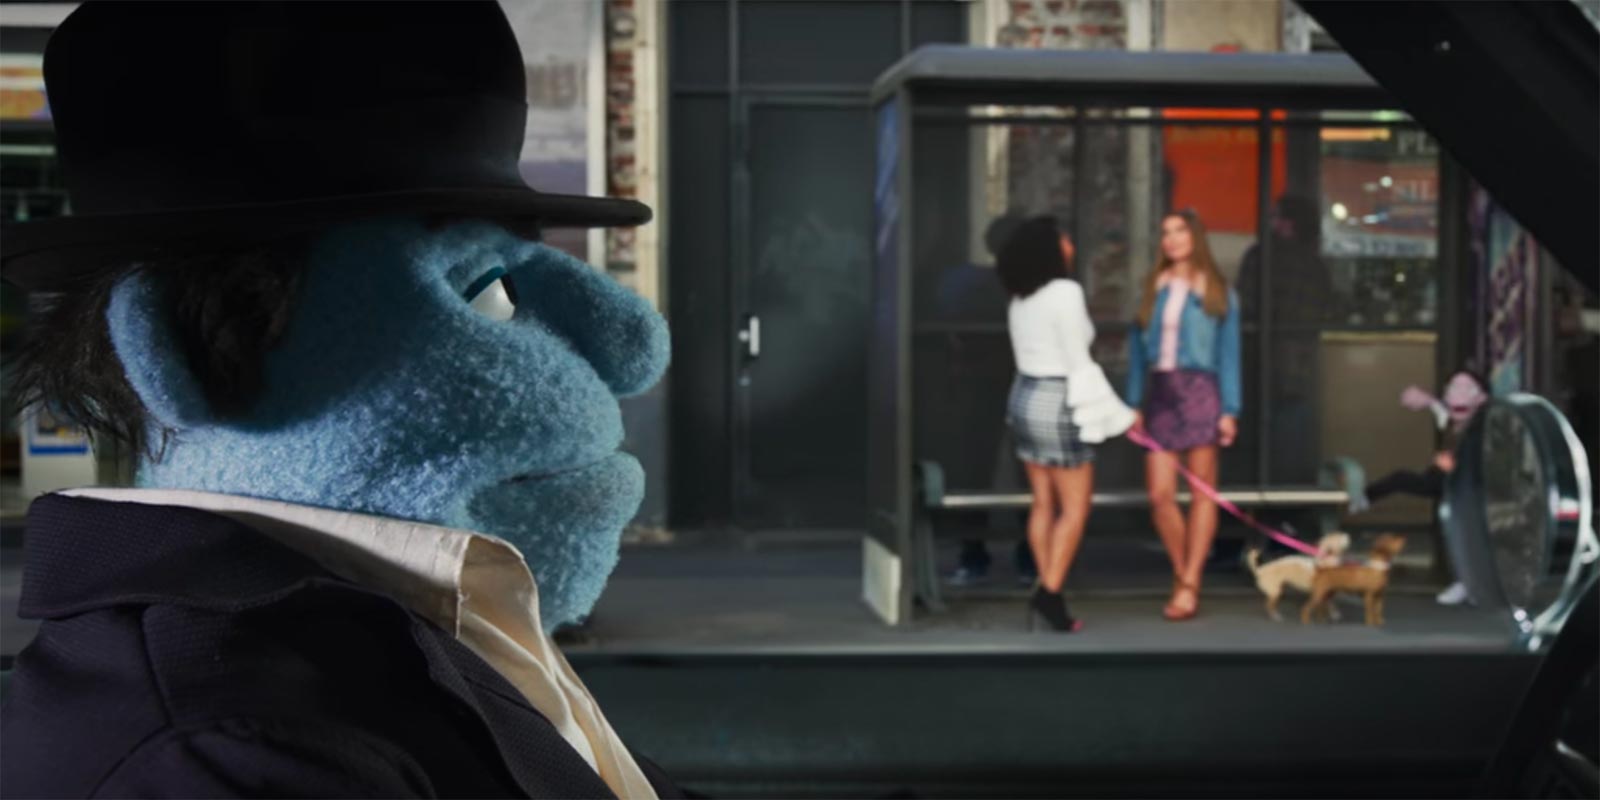 "The Happytime Murders" Review: Bland, Predictable, and Unfunny